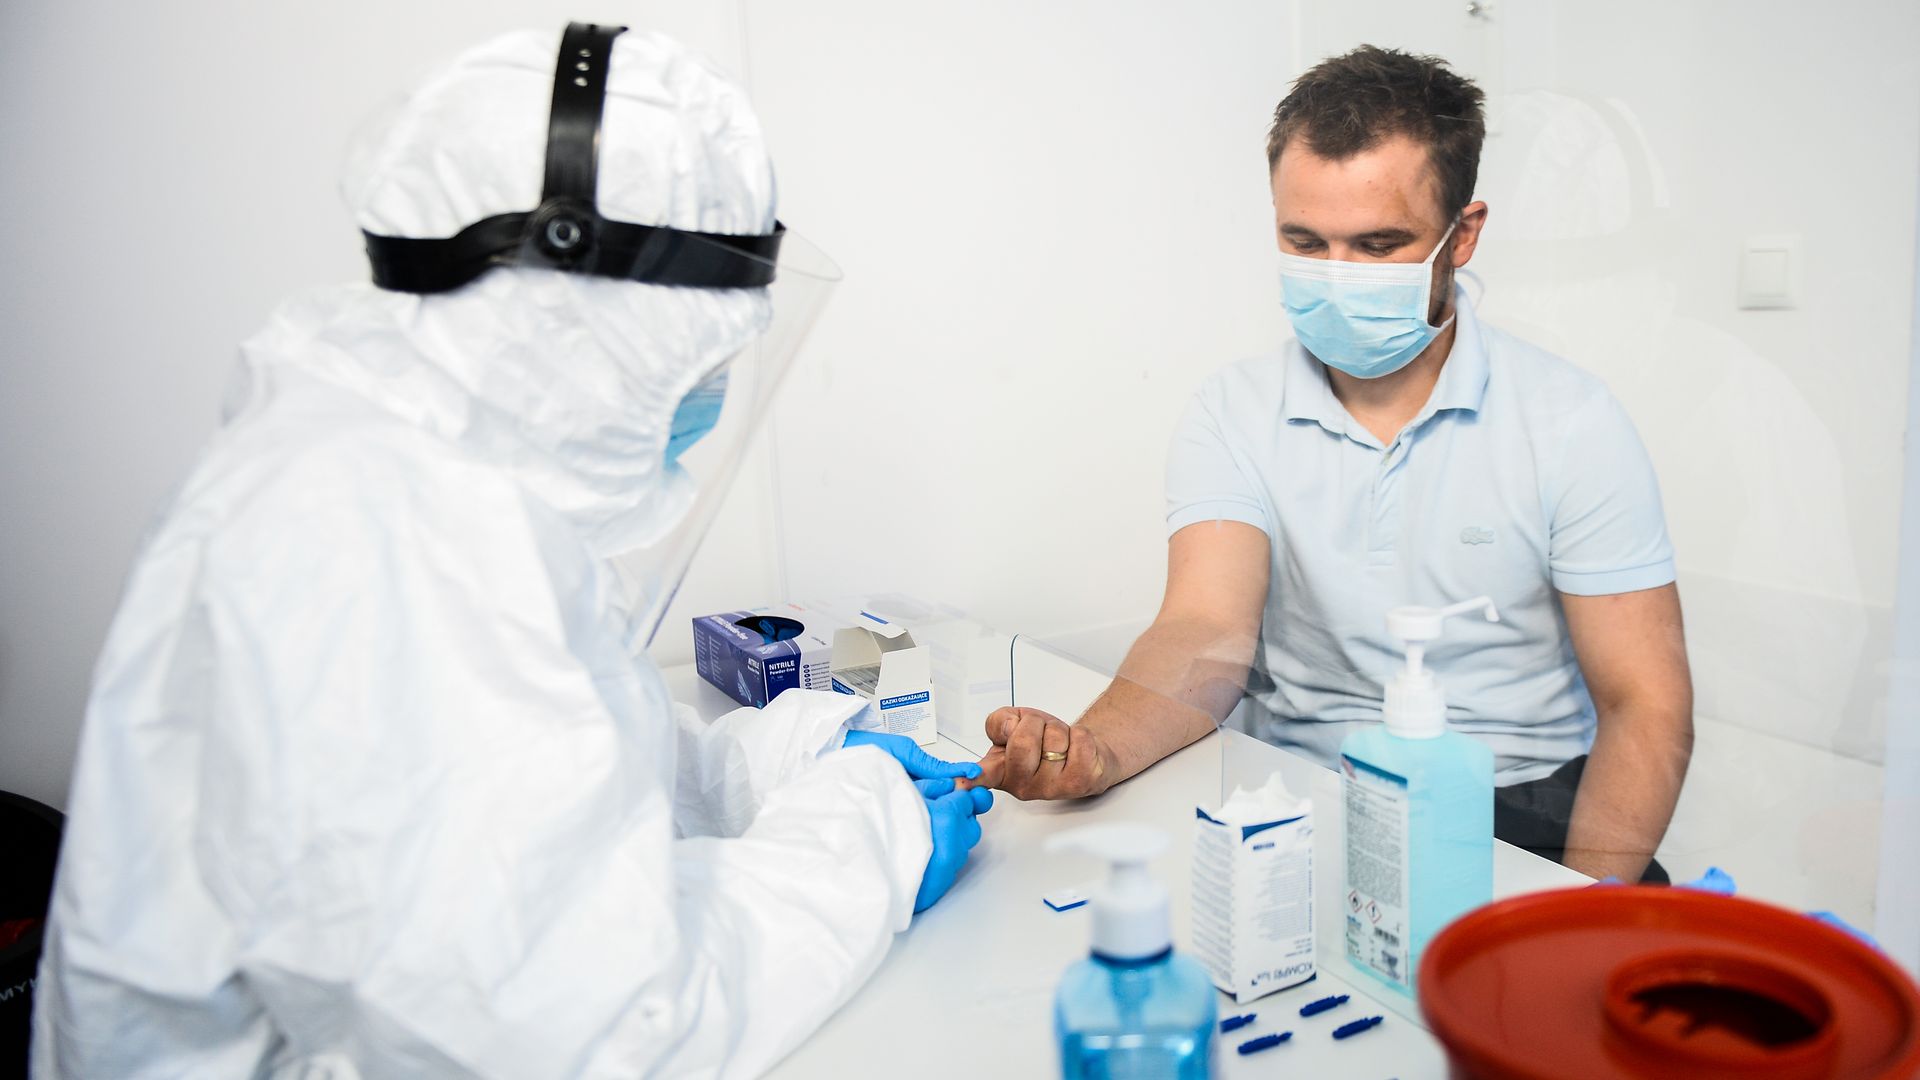 A health worker extracting blood from a patient for a coronavirus antibody test in Krakow, Poland, in April 2020.